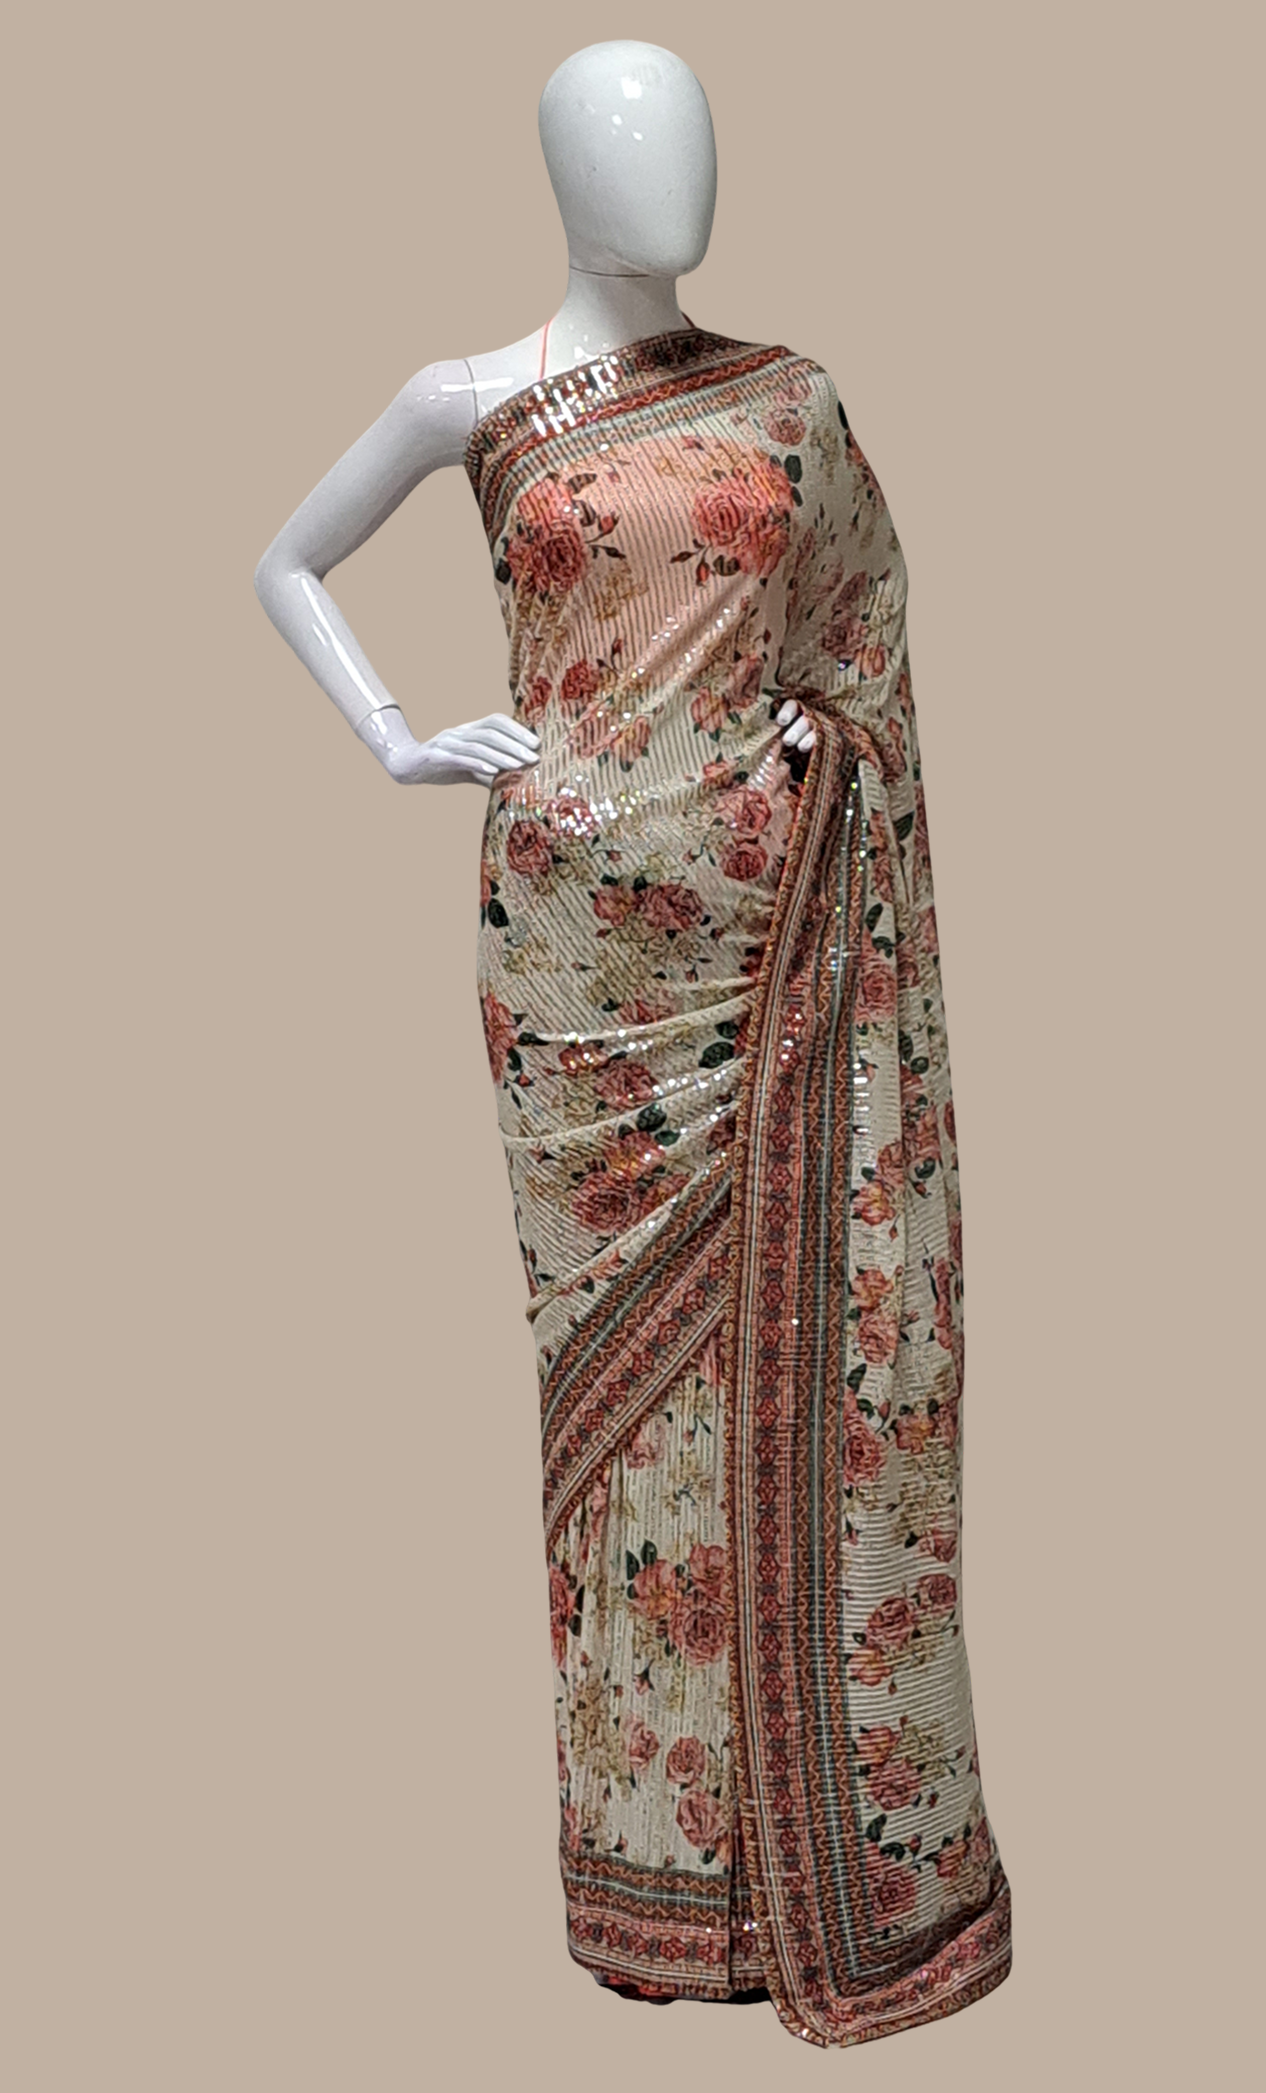 Floral Printed With Sequin Embroidered Sari